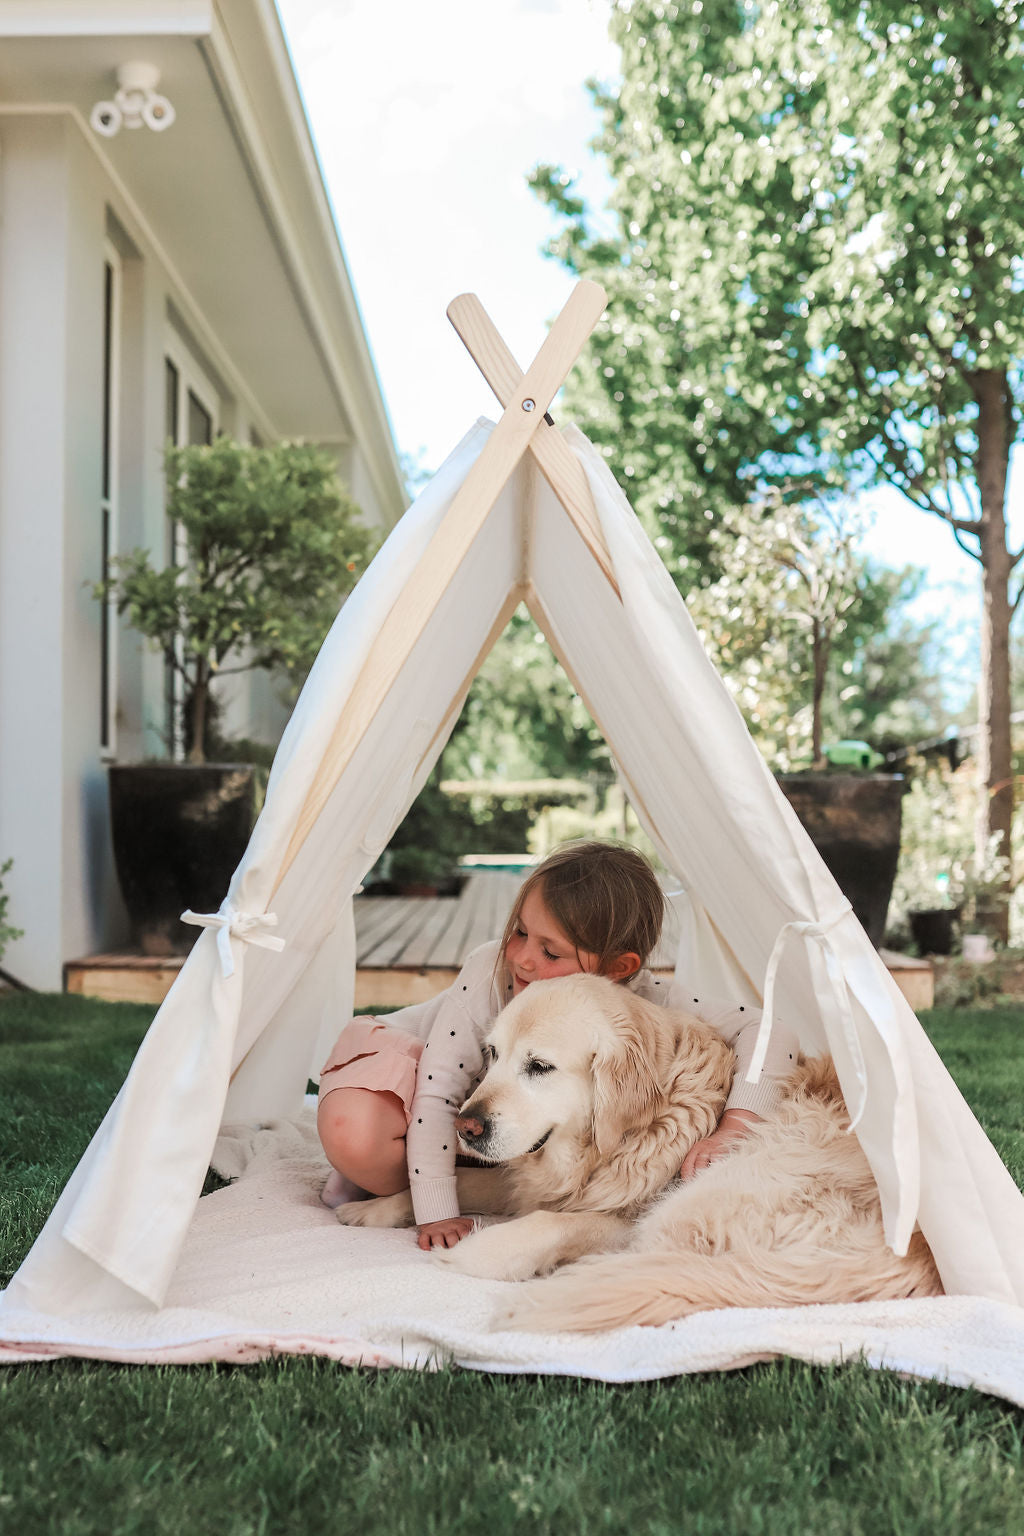 Image of child and golden retriever sitting inside Petite Maison Play Safari Tent cubby